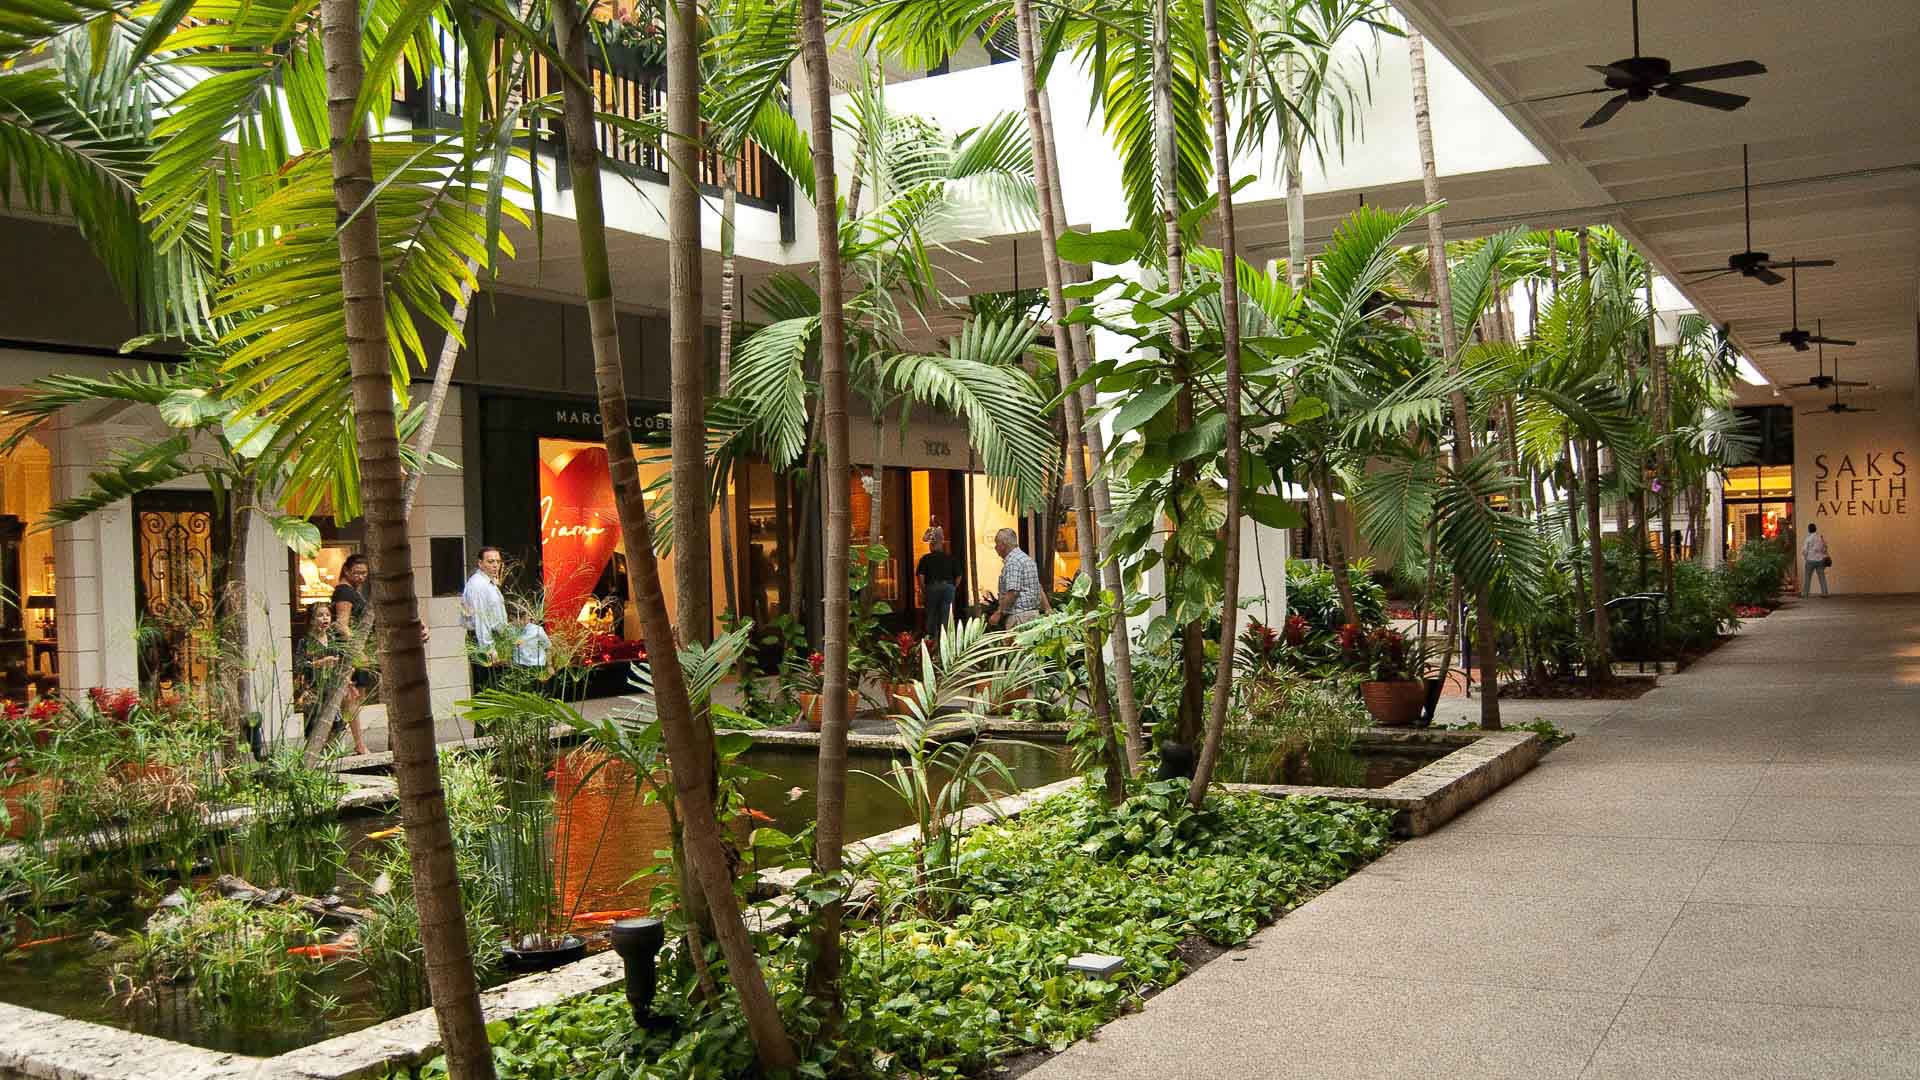 Take a look at the 5 most luxurious shopping malls in the USA